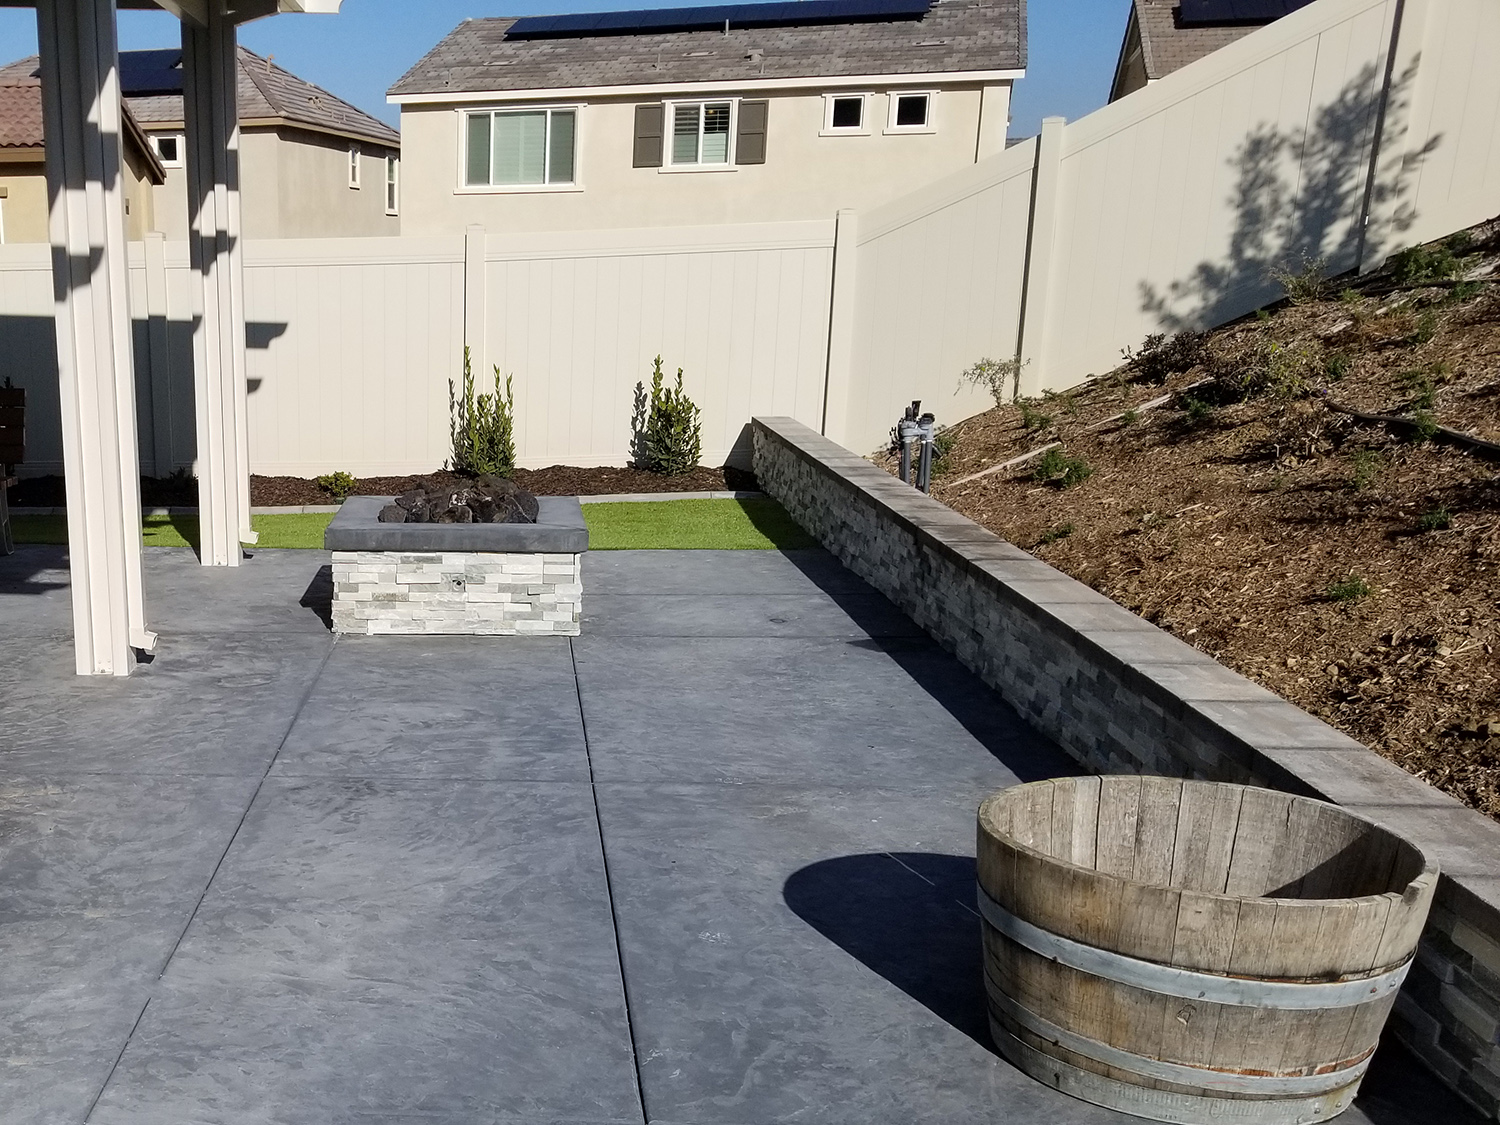 Concrete, fire pit and patio cover